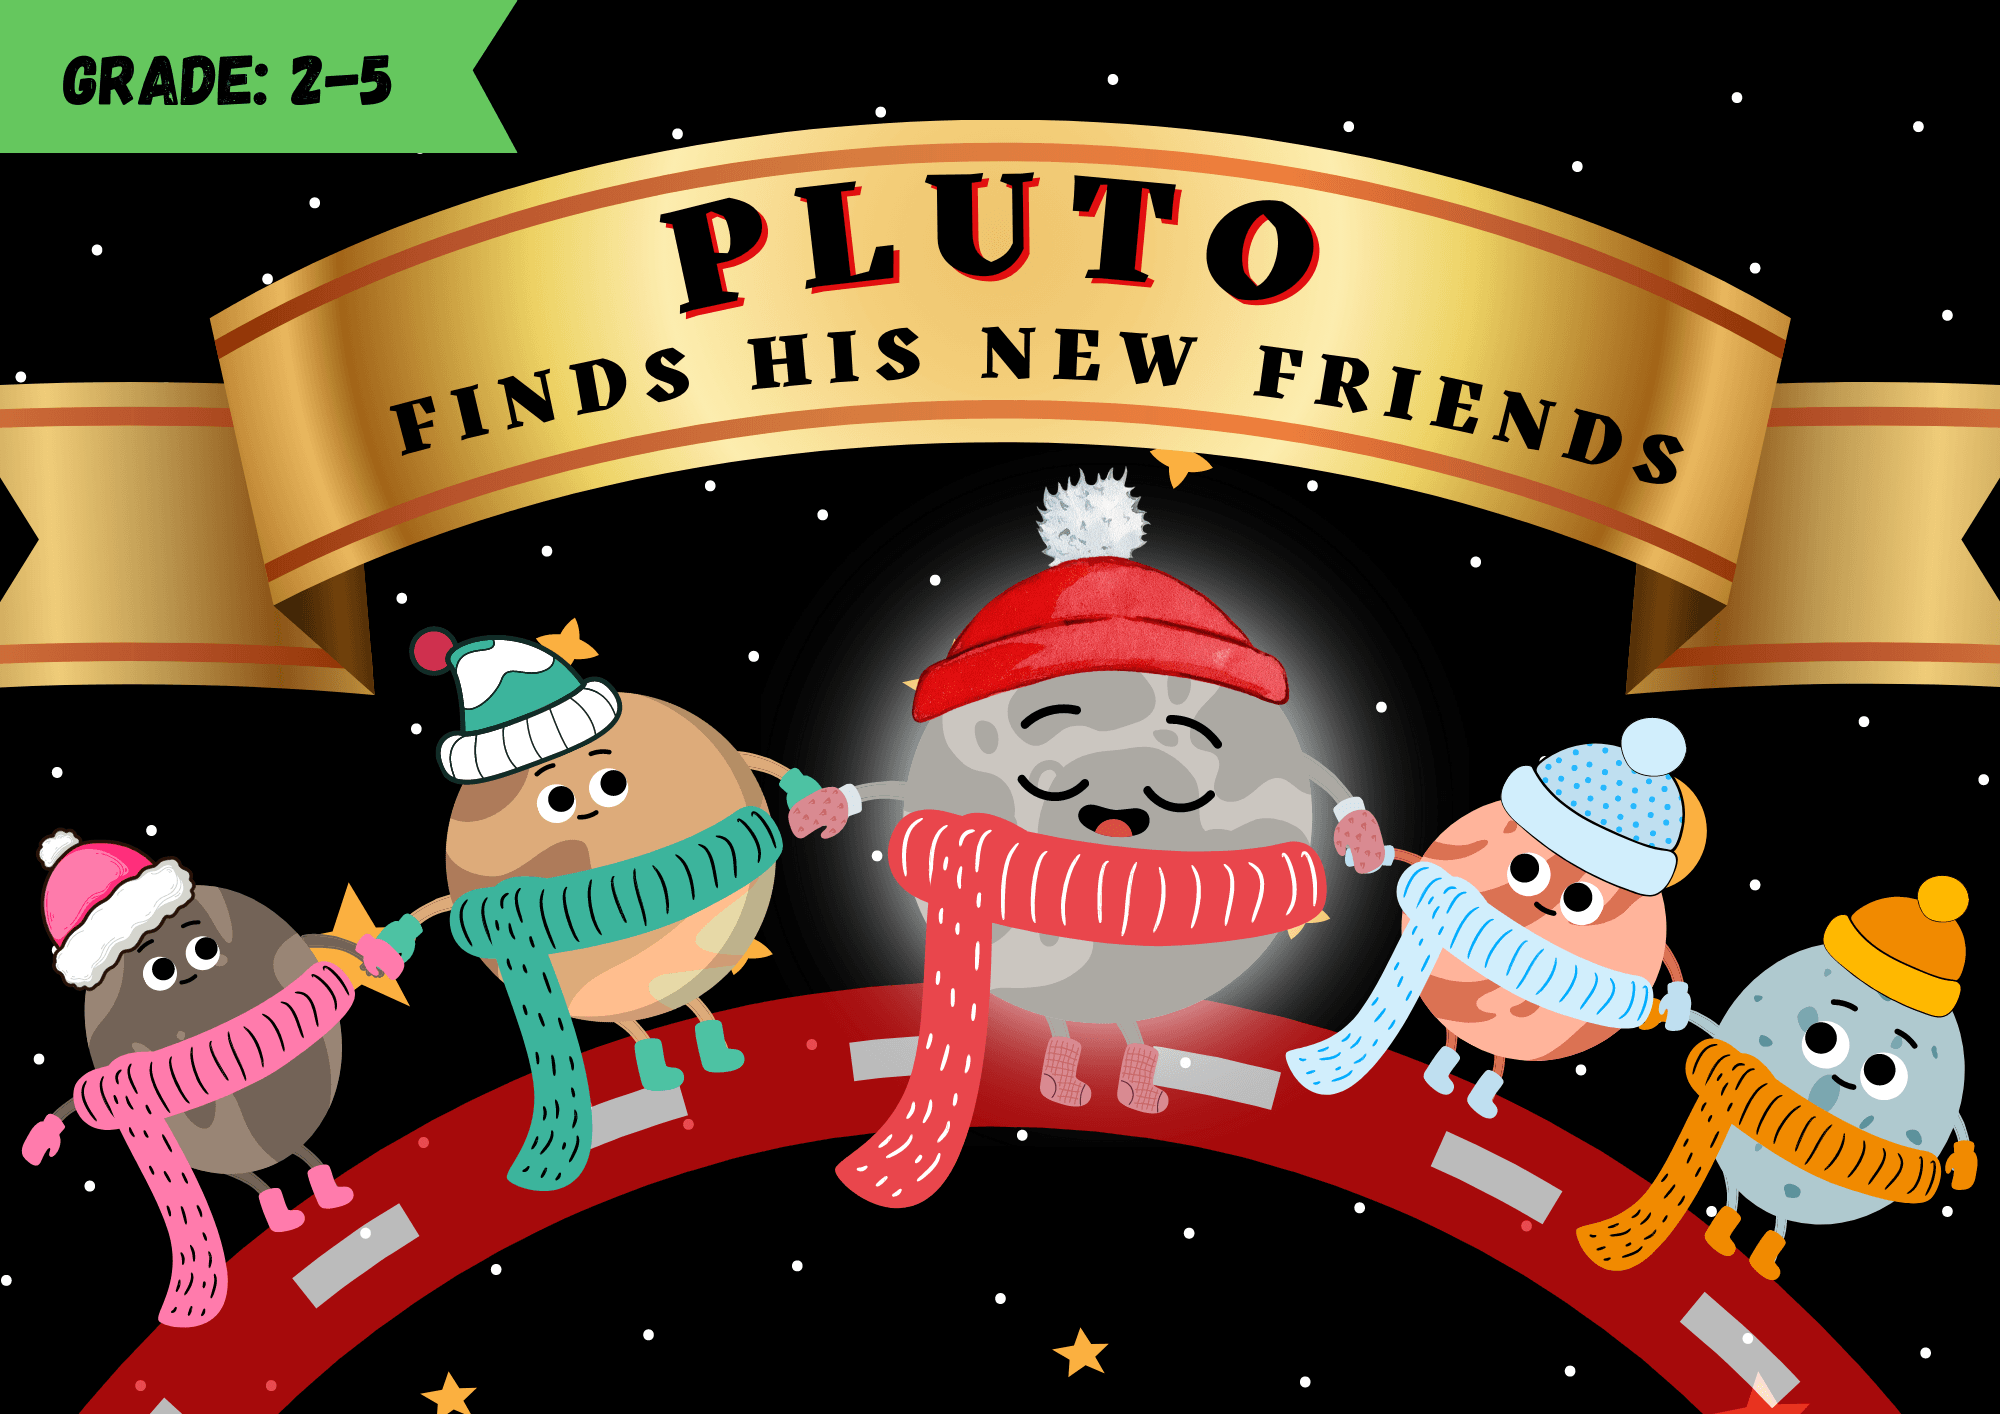 Pluto finds his new friends